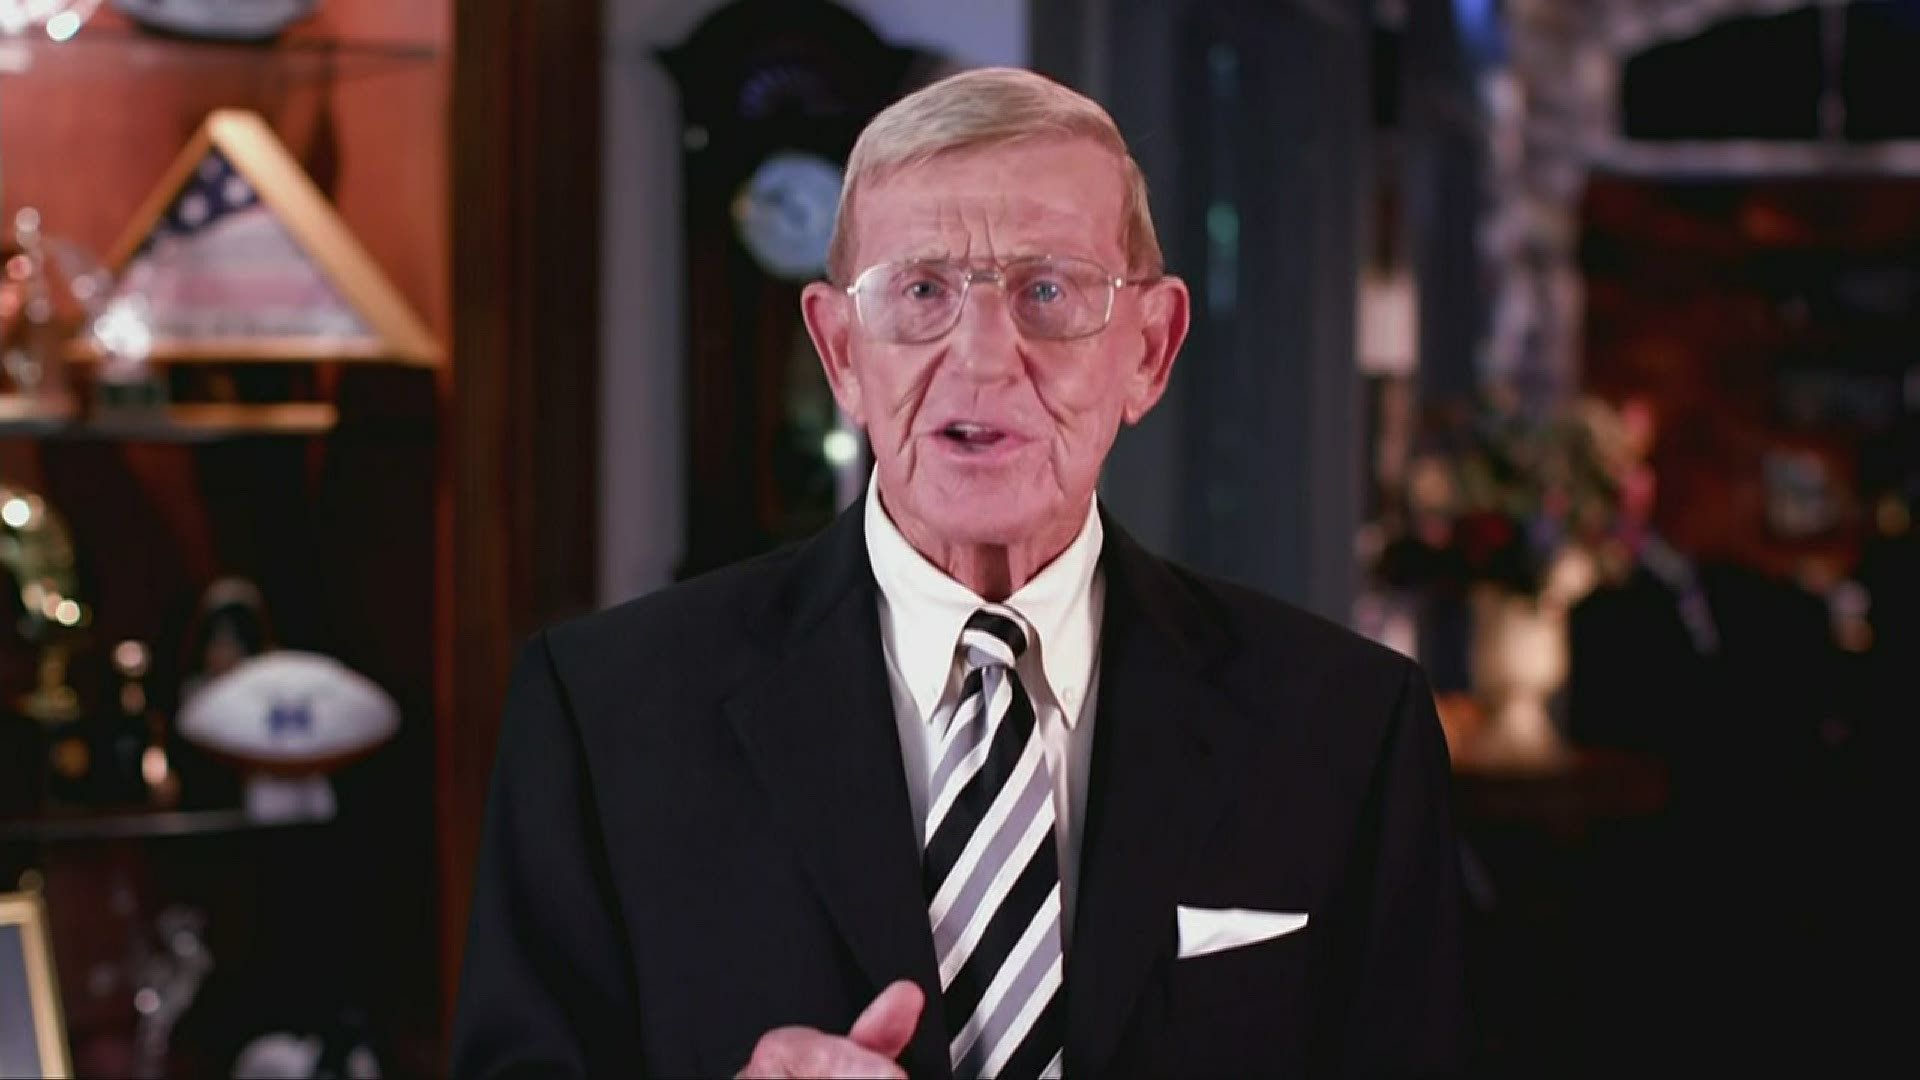 College Fooball Hall of Fame Coach Lou Holtz, best known for his time at Notre Dame, spoke at the 2020 Republican National Convention.